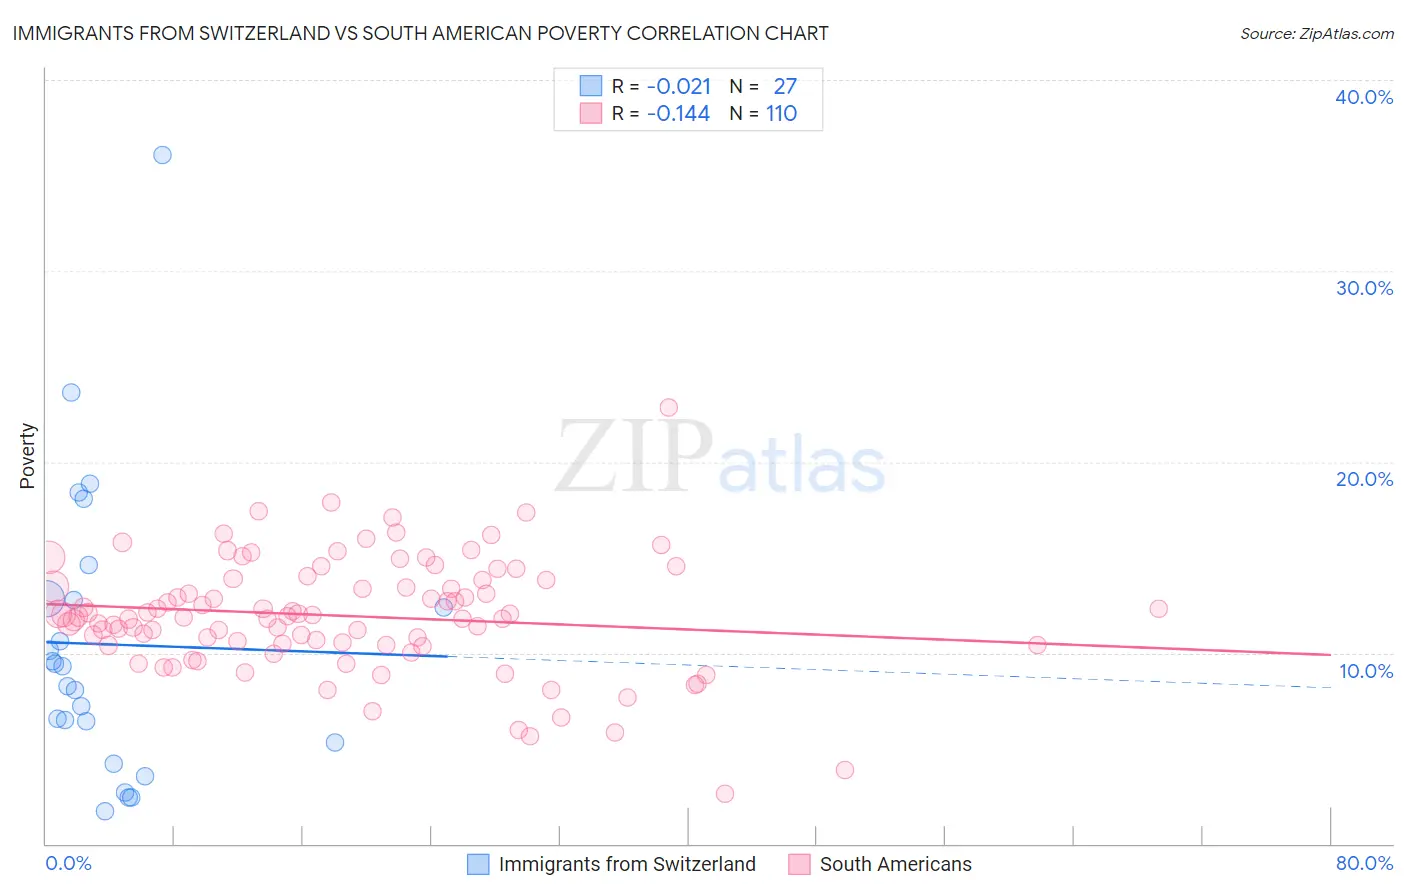 Immigrants from Switzerland vs South American Poverty